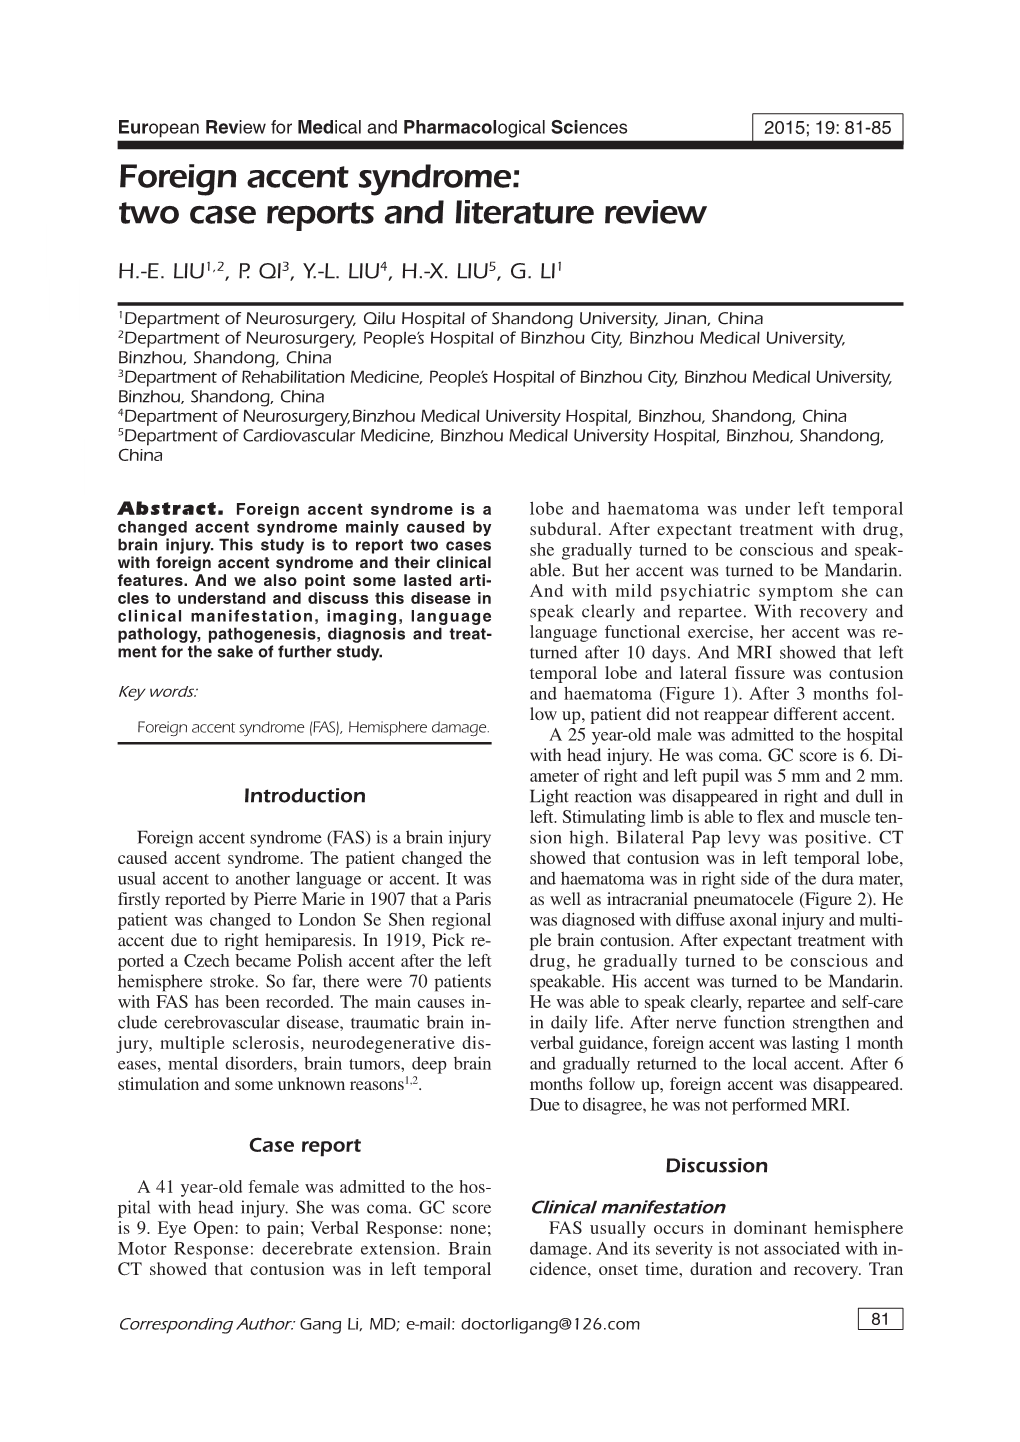 Foreign Accent Syndrome: Two Case Reports and Literature Review